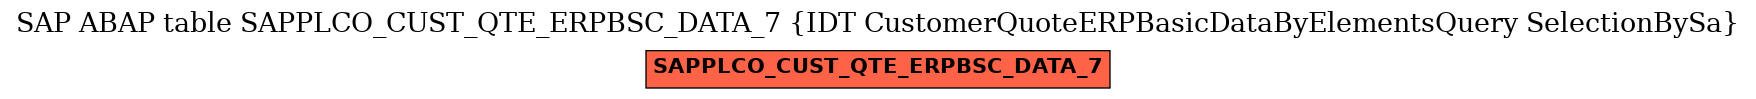 E-R Diagram for table SAPPLCO_CUST_QTE_ERPBSC_DATA_7 (IDT CustomerQuoteERPBasicDataByElementsQuery SelectionBySa)